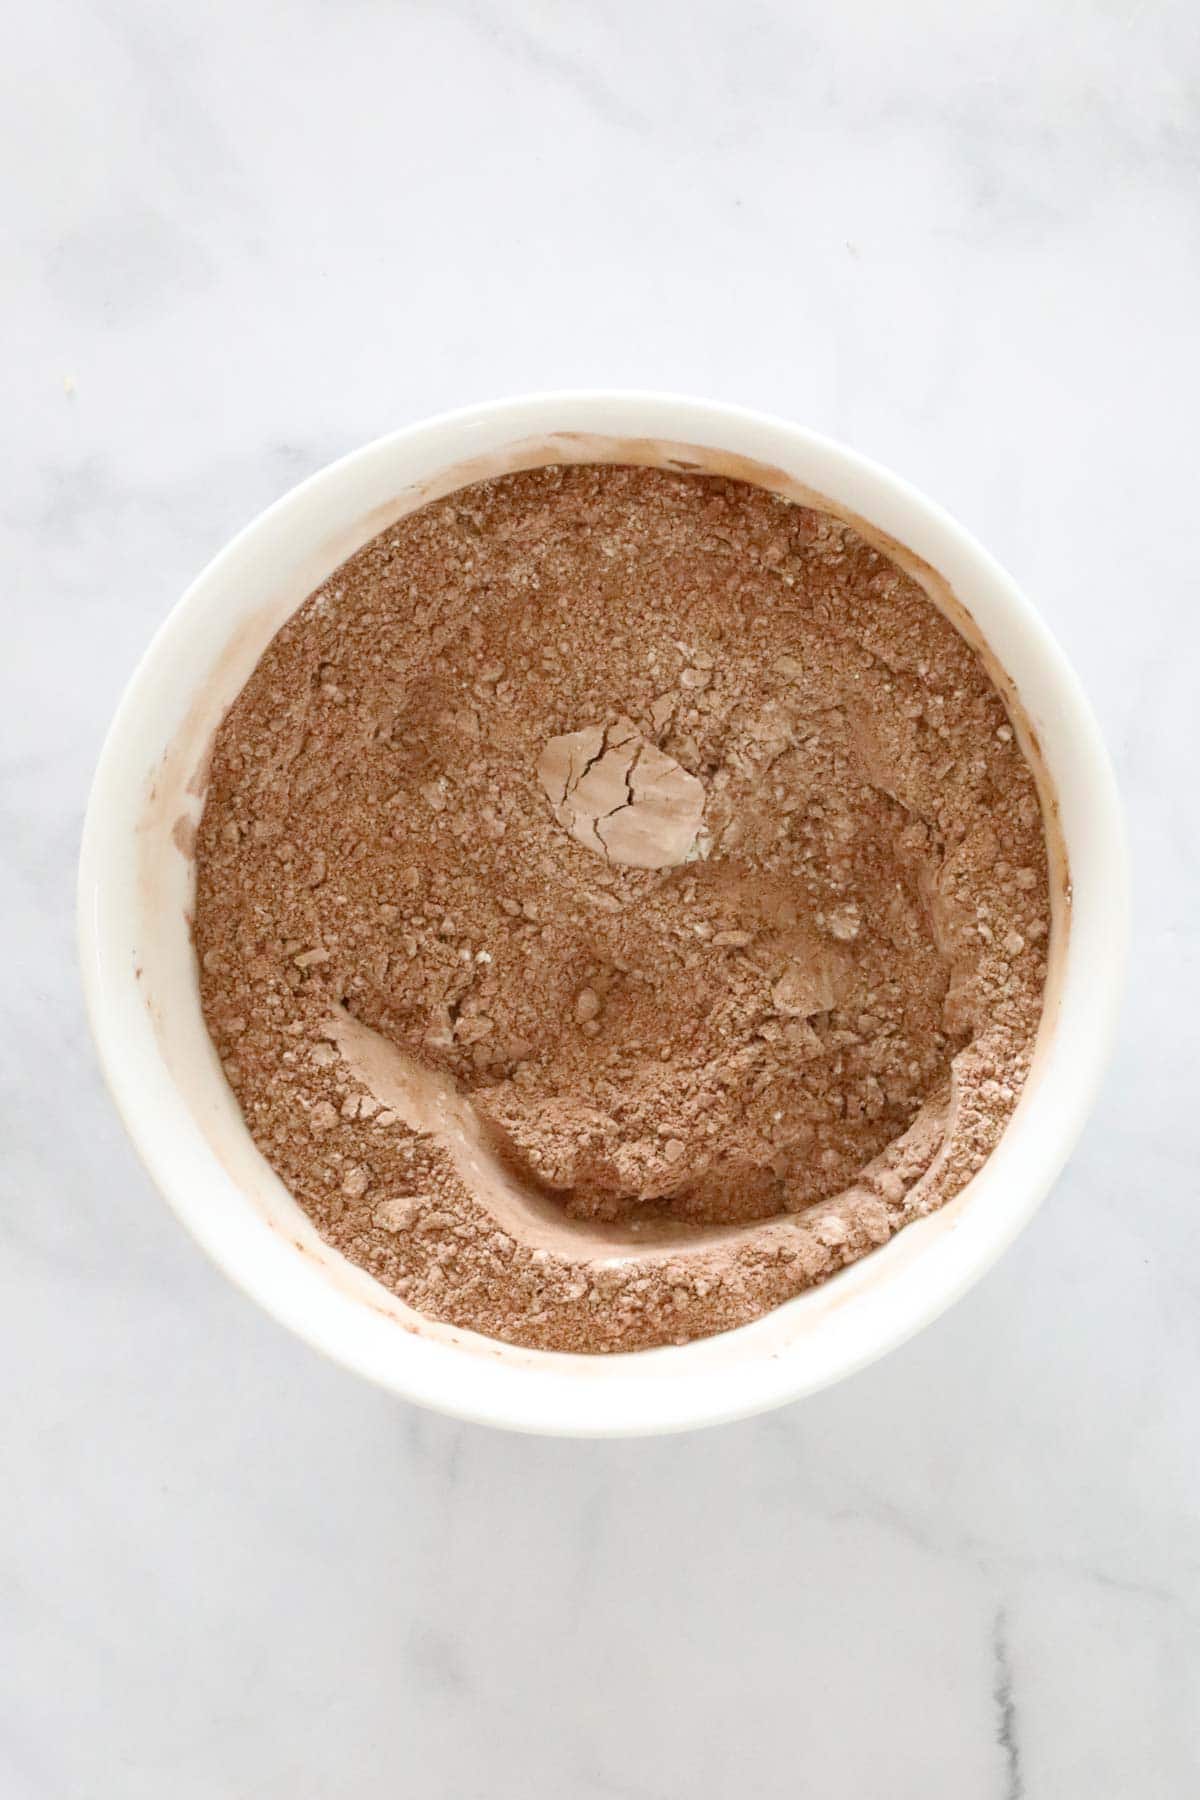 Cocoa powder and flour in a mixing bowl.